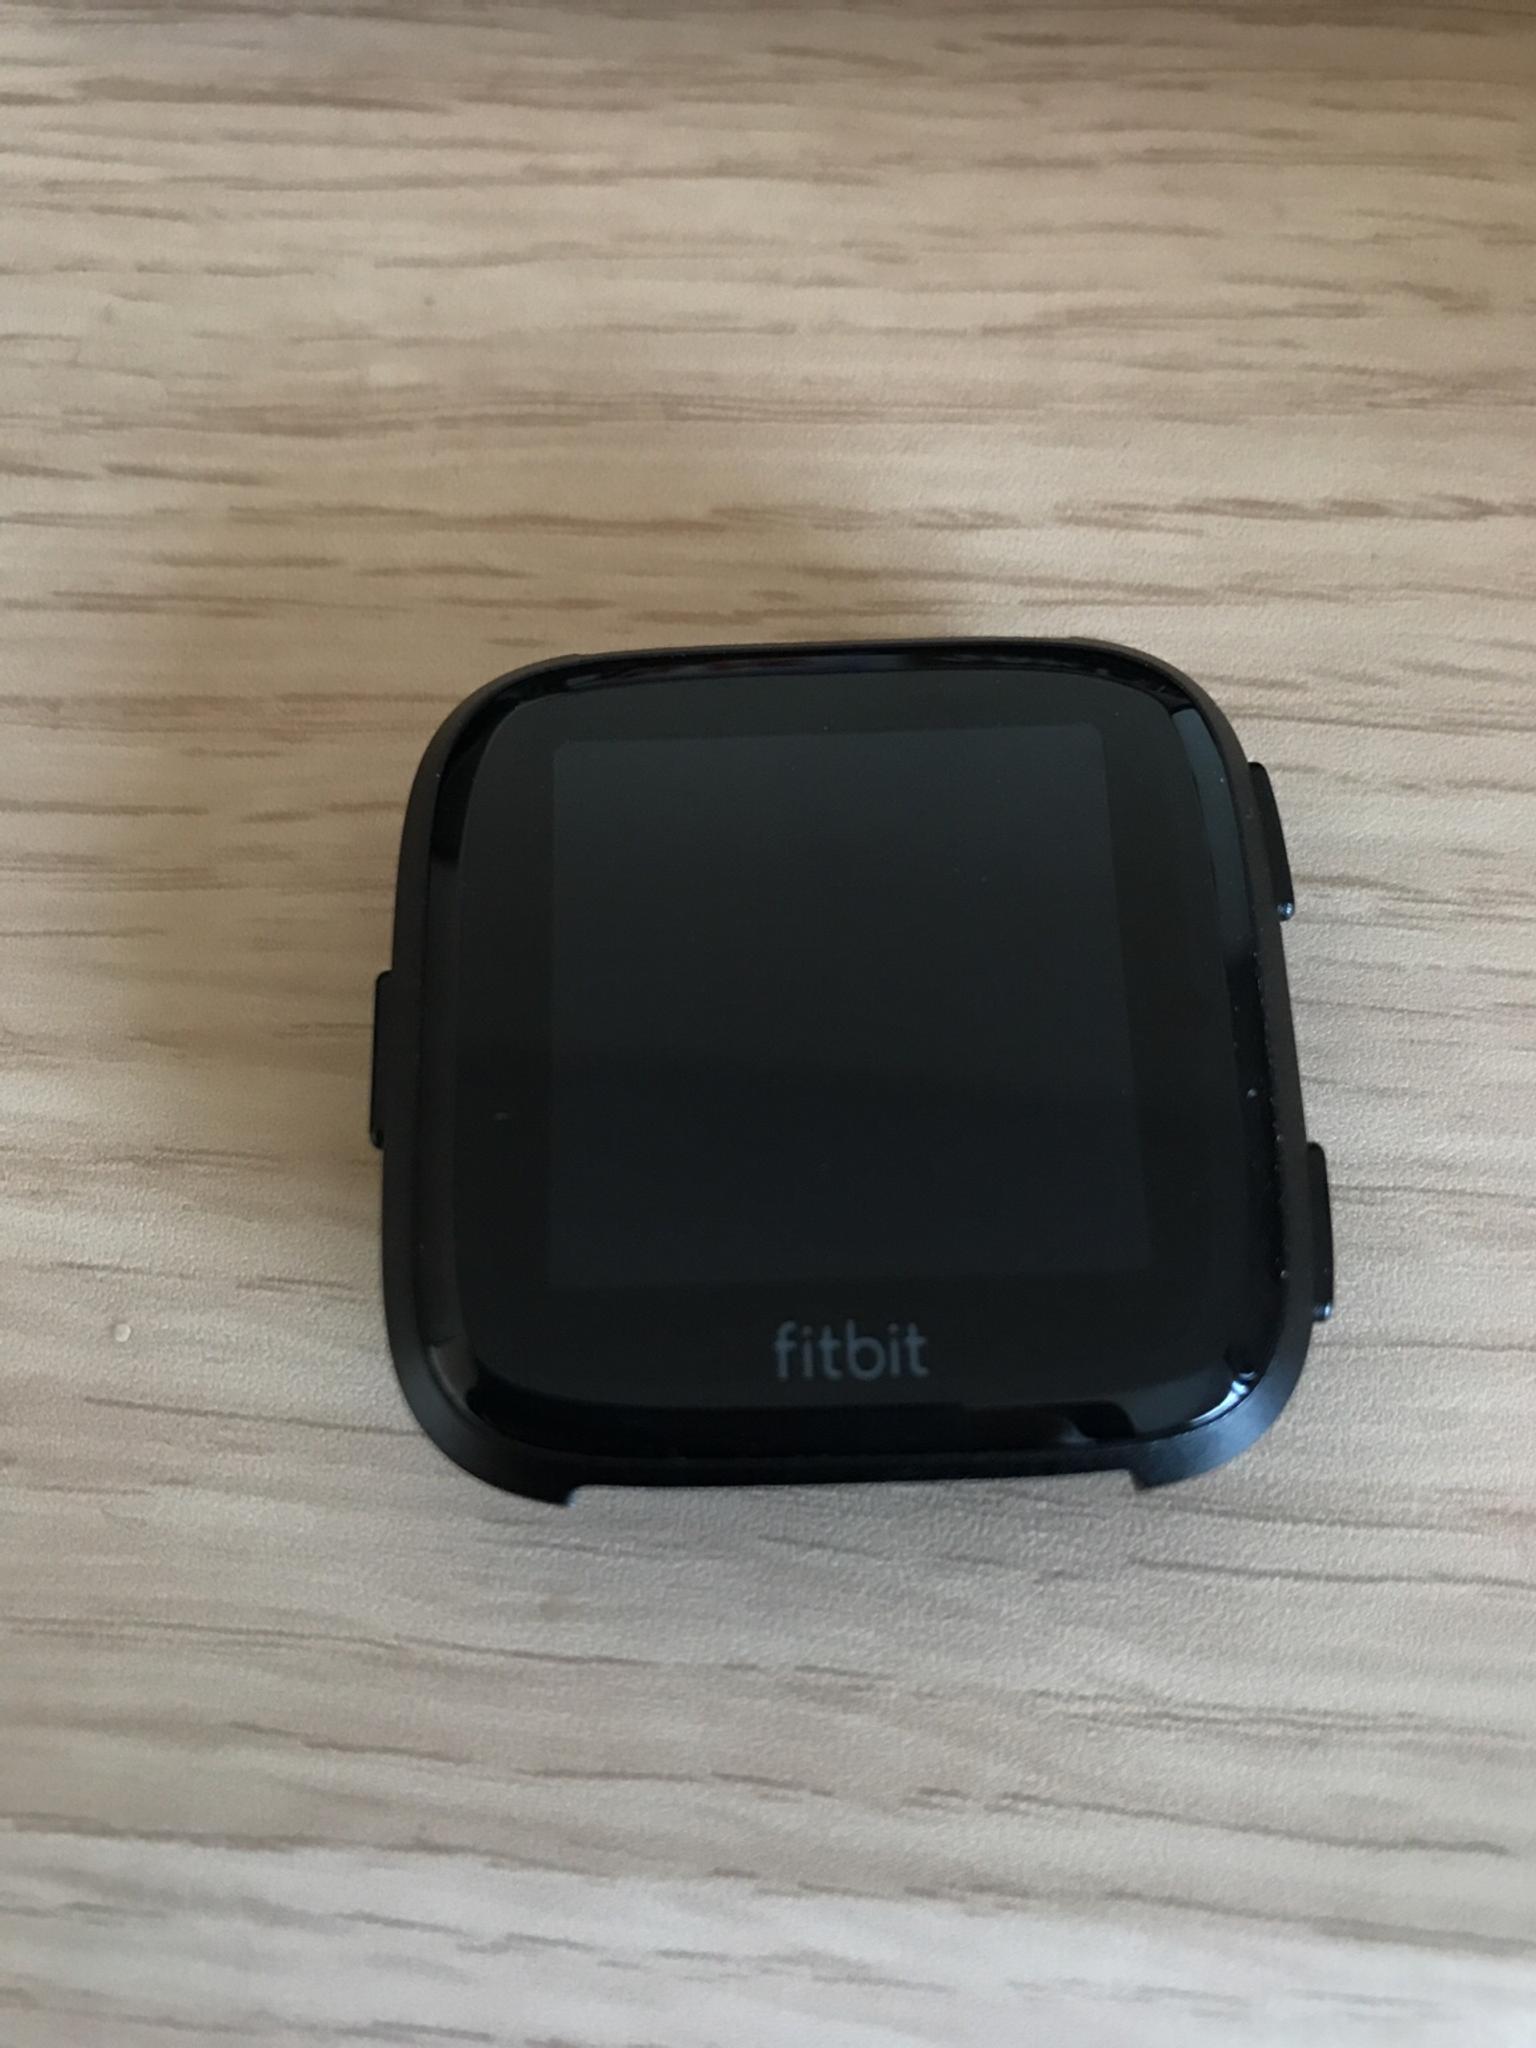 New Fitbit Versa (pebble only) in for 